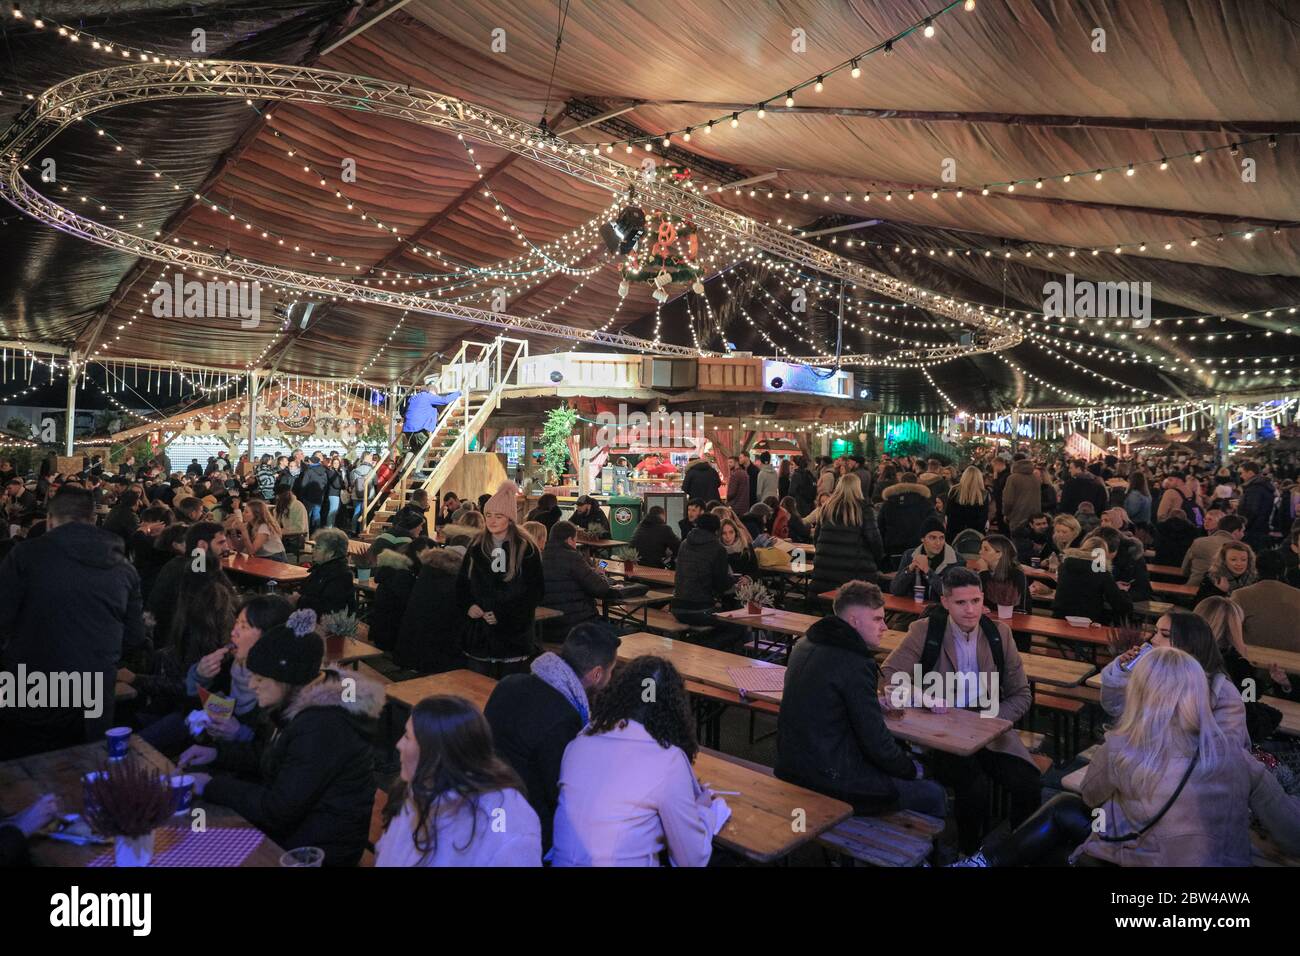 Crowds in a German beer tent and Bavarian beer hall at the Bavarian Village, Winter Wonderland, Hyde Park, London, UK Stock Photo